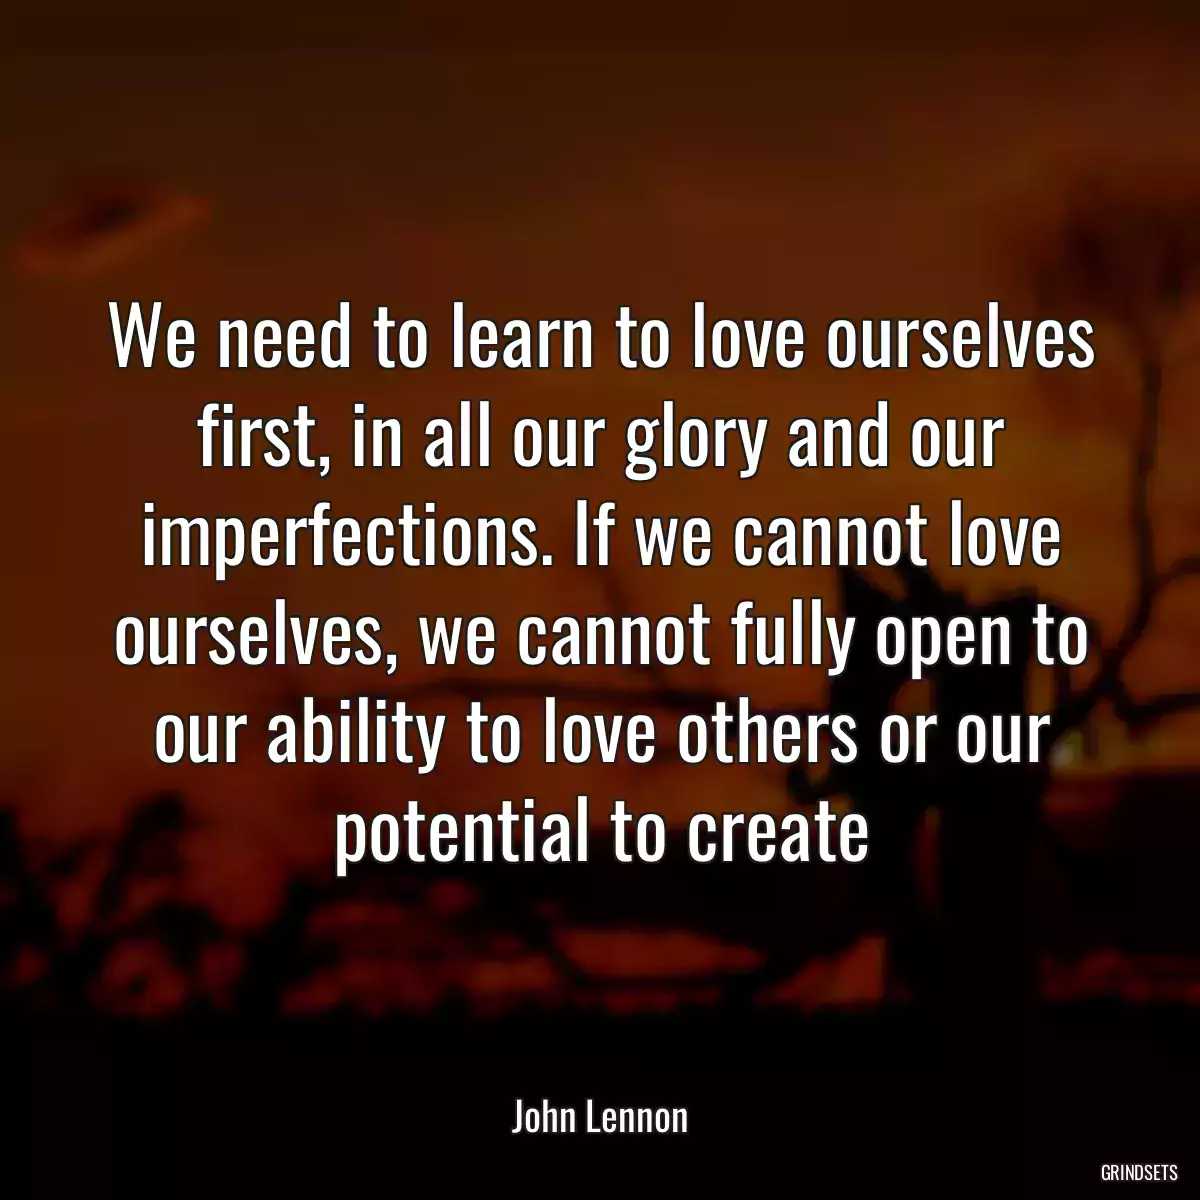 We need to learn to love ourselves first, in all our glory and our imperfections. If we cannot love ourselves, we cannot fully open to our ability to love others or our potential to create